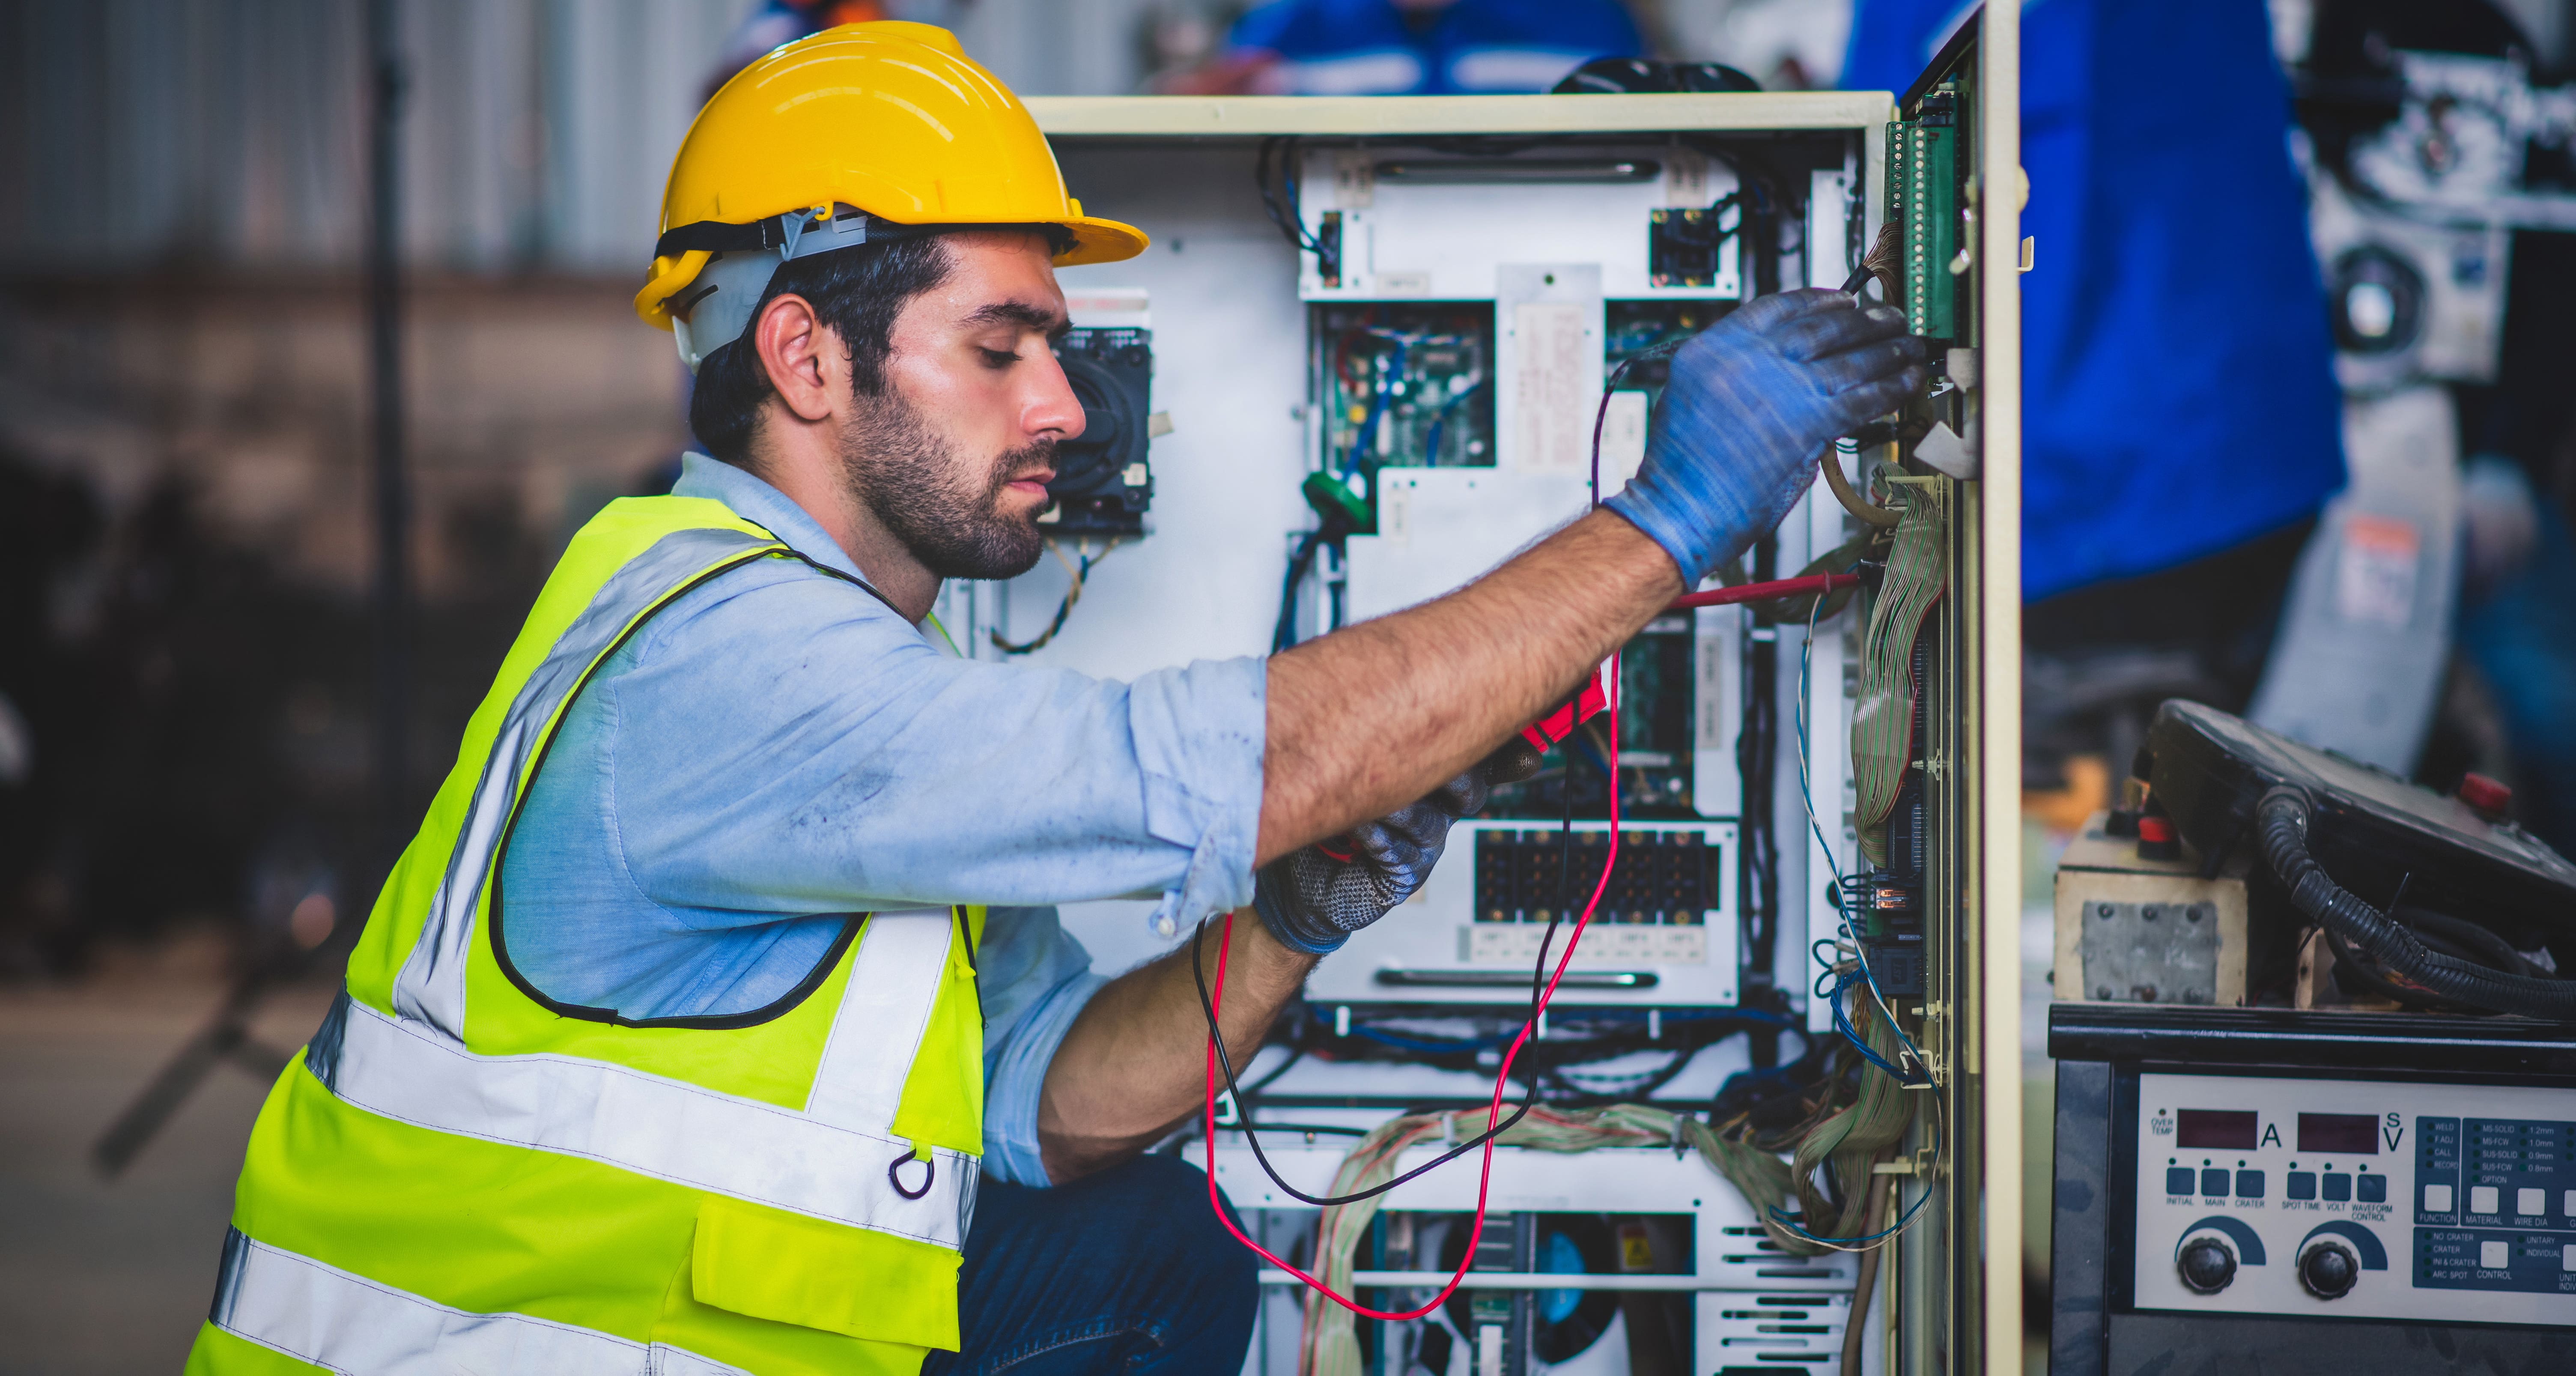 An electrical panel builder who is being benefitted by digital twin technology at work.